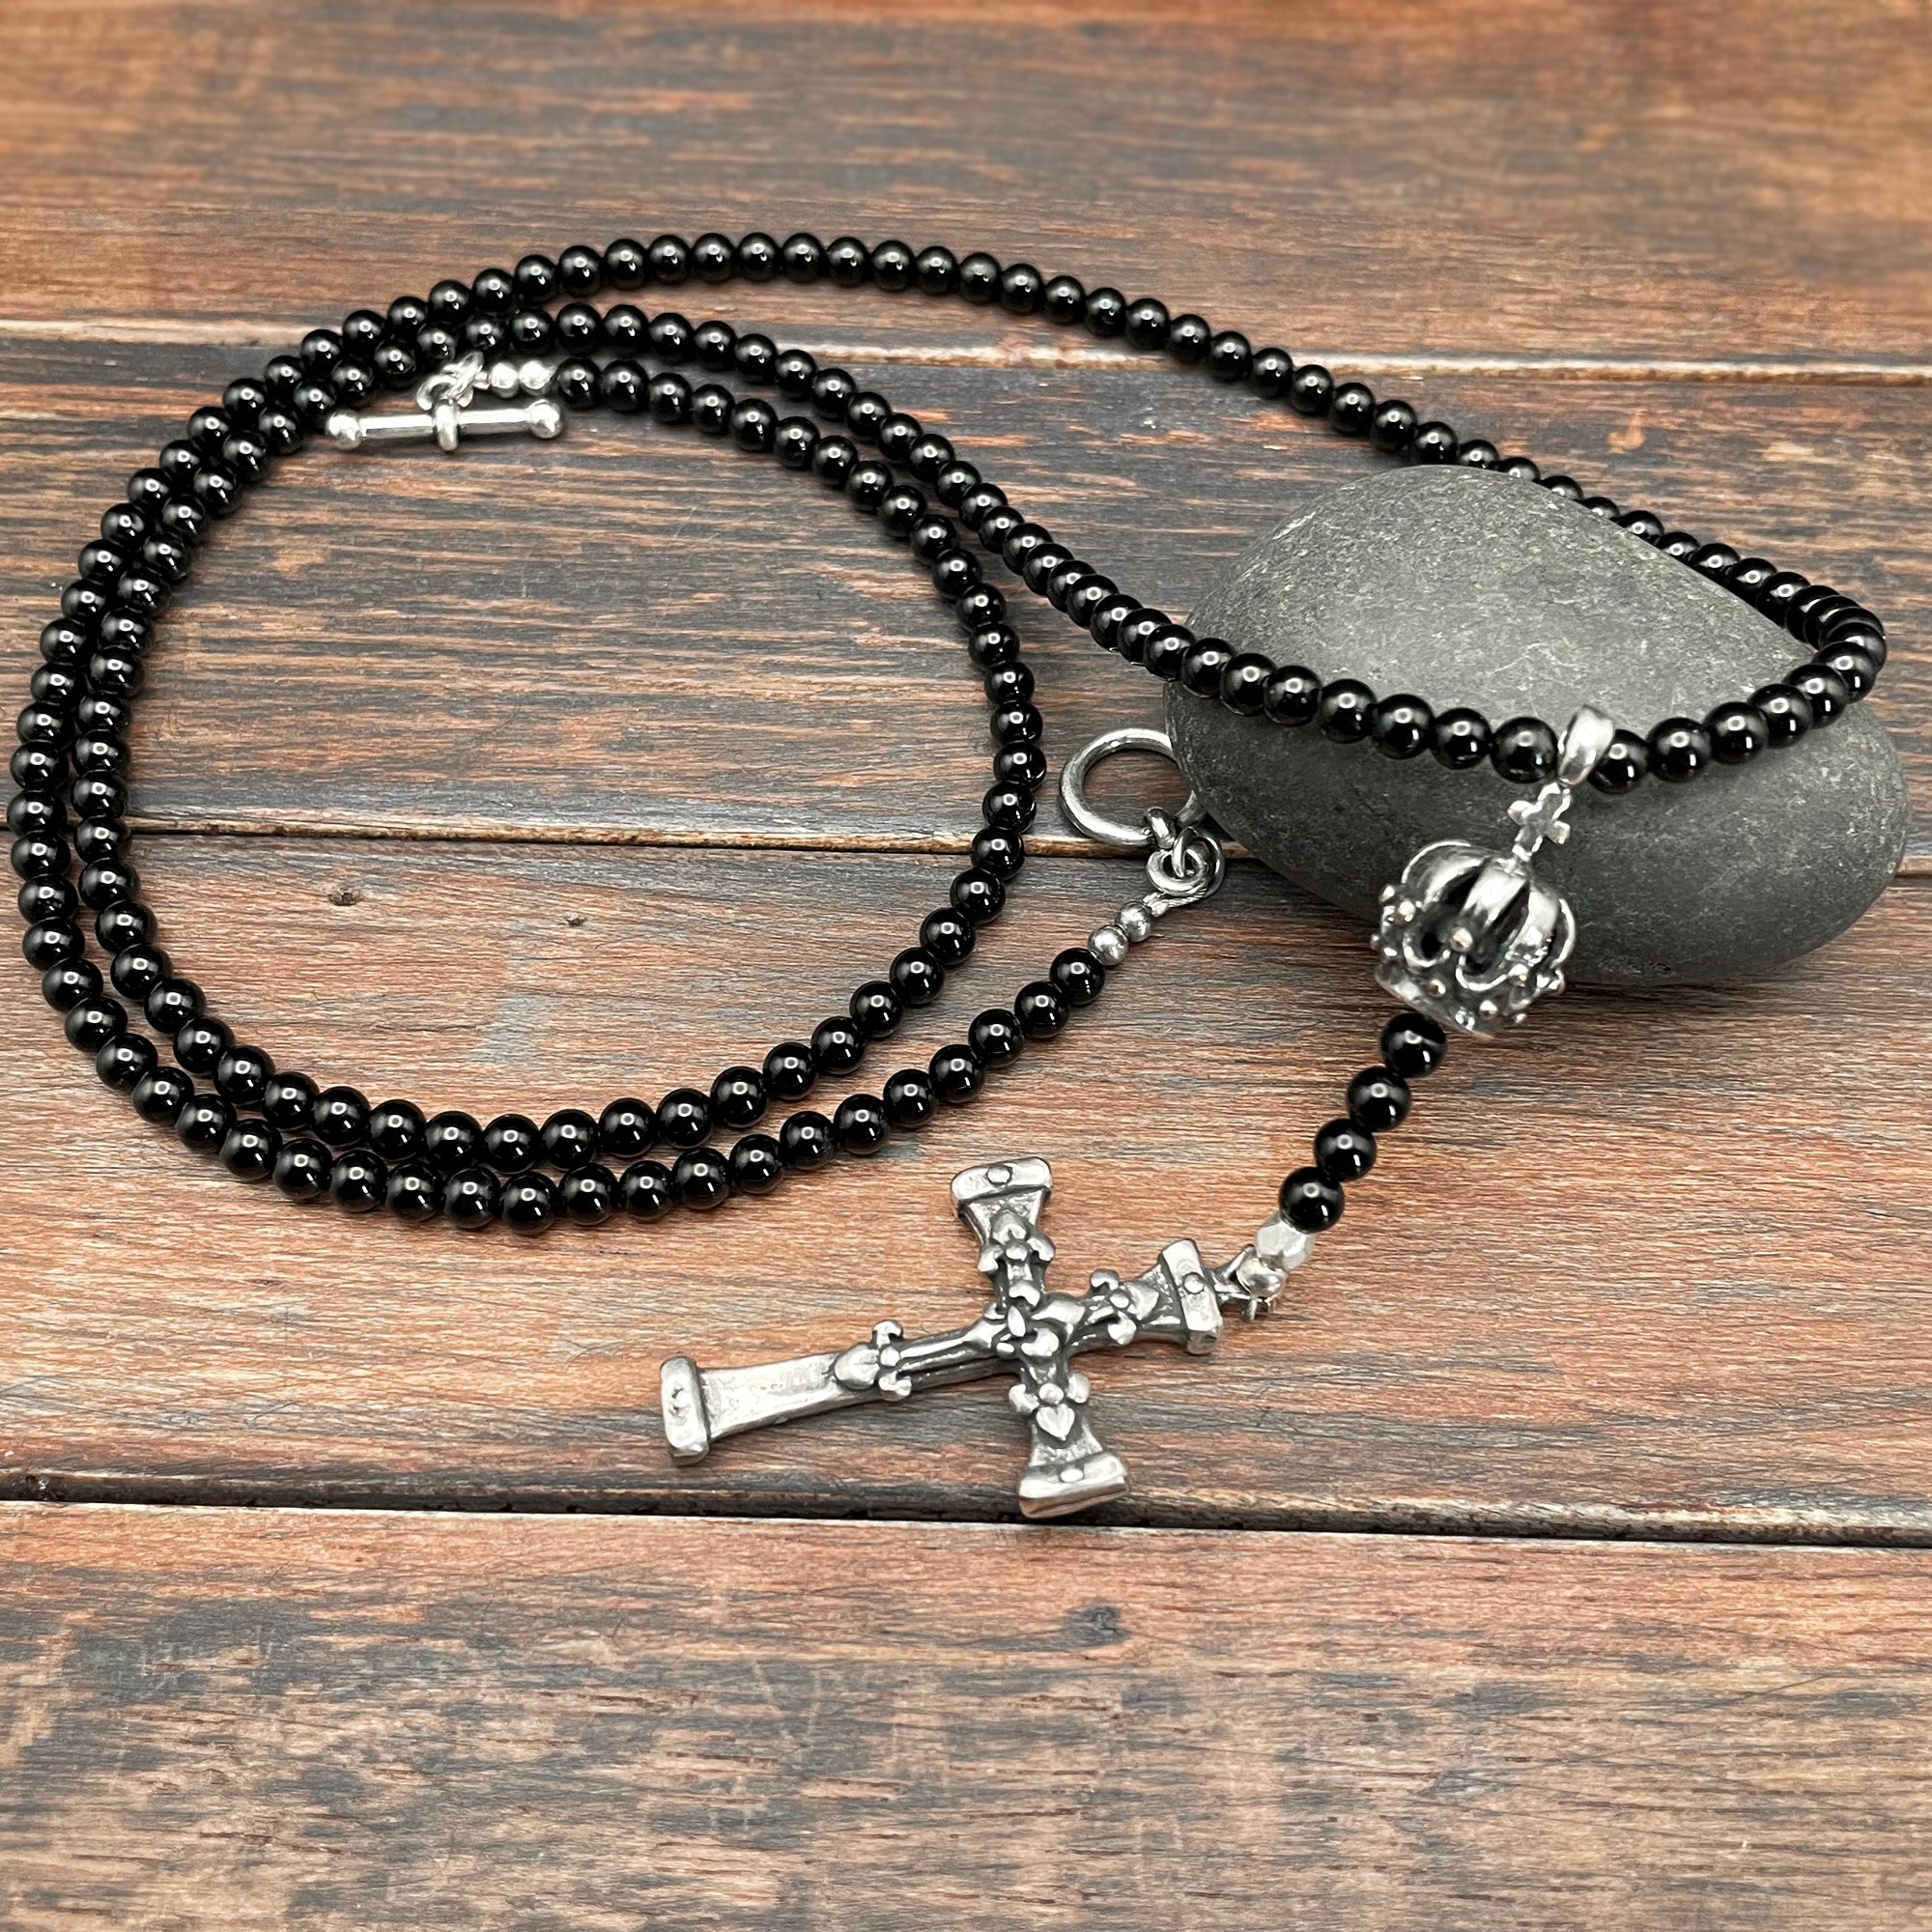 Buy The Black Onyx and Silver Cross Mens Beaded Necklace | JaeBee 28